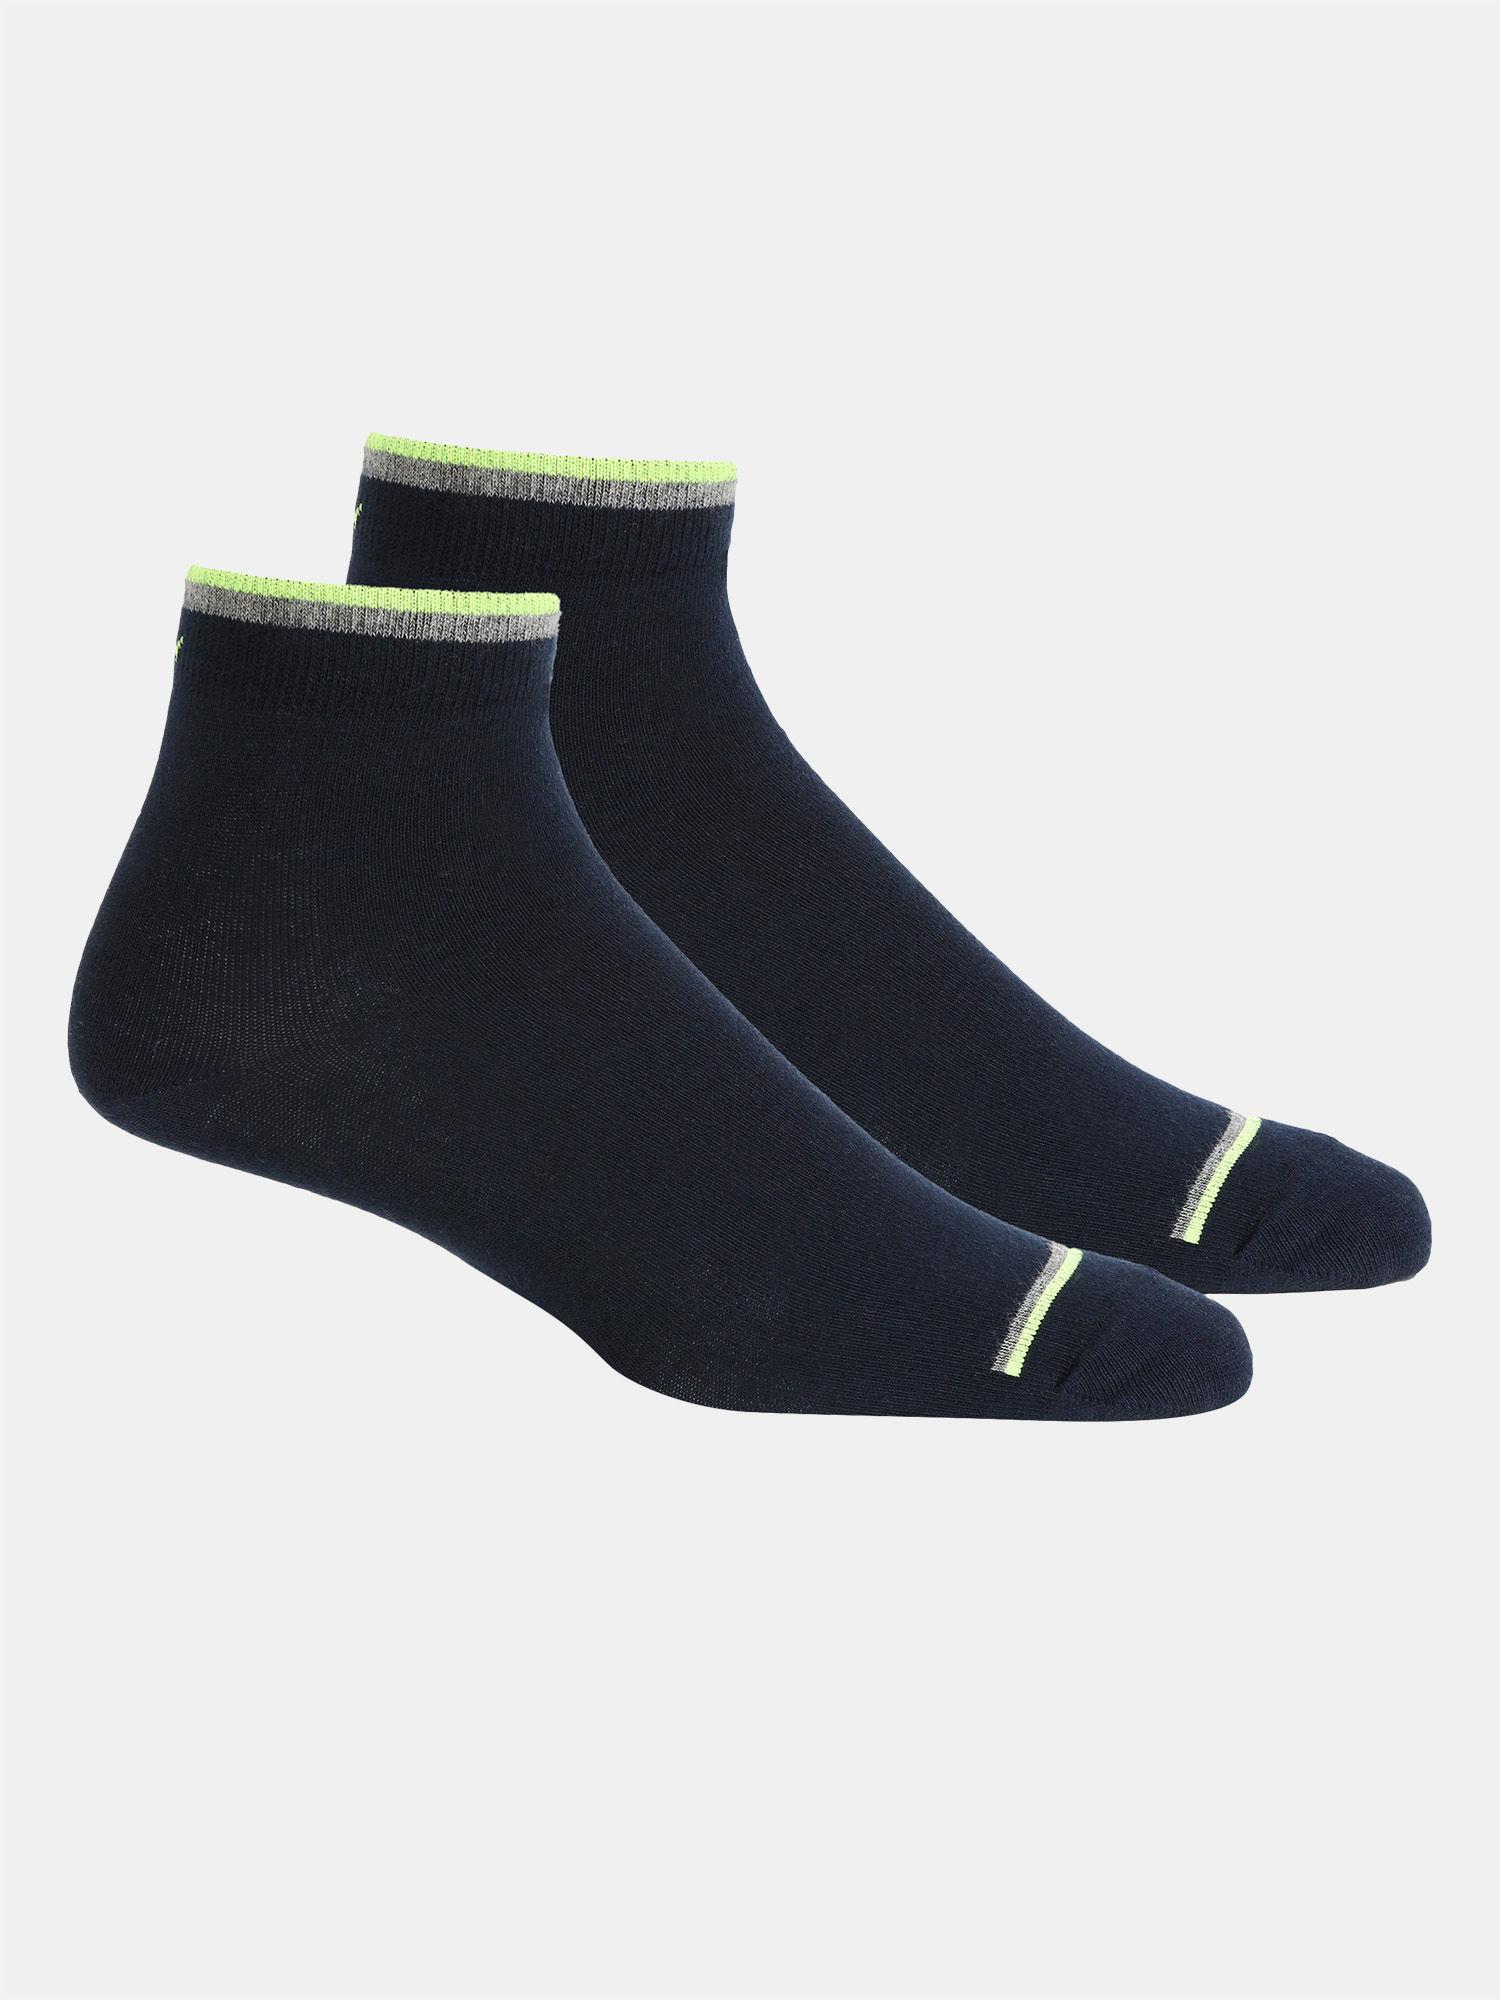 men compact cotton stretch ankle length socks-navy blue (pack of 2)